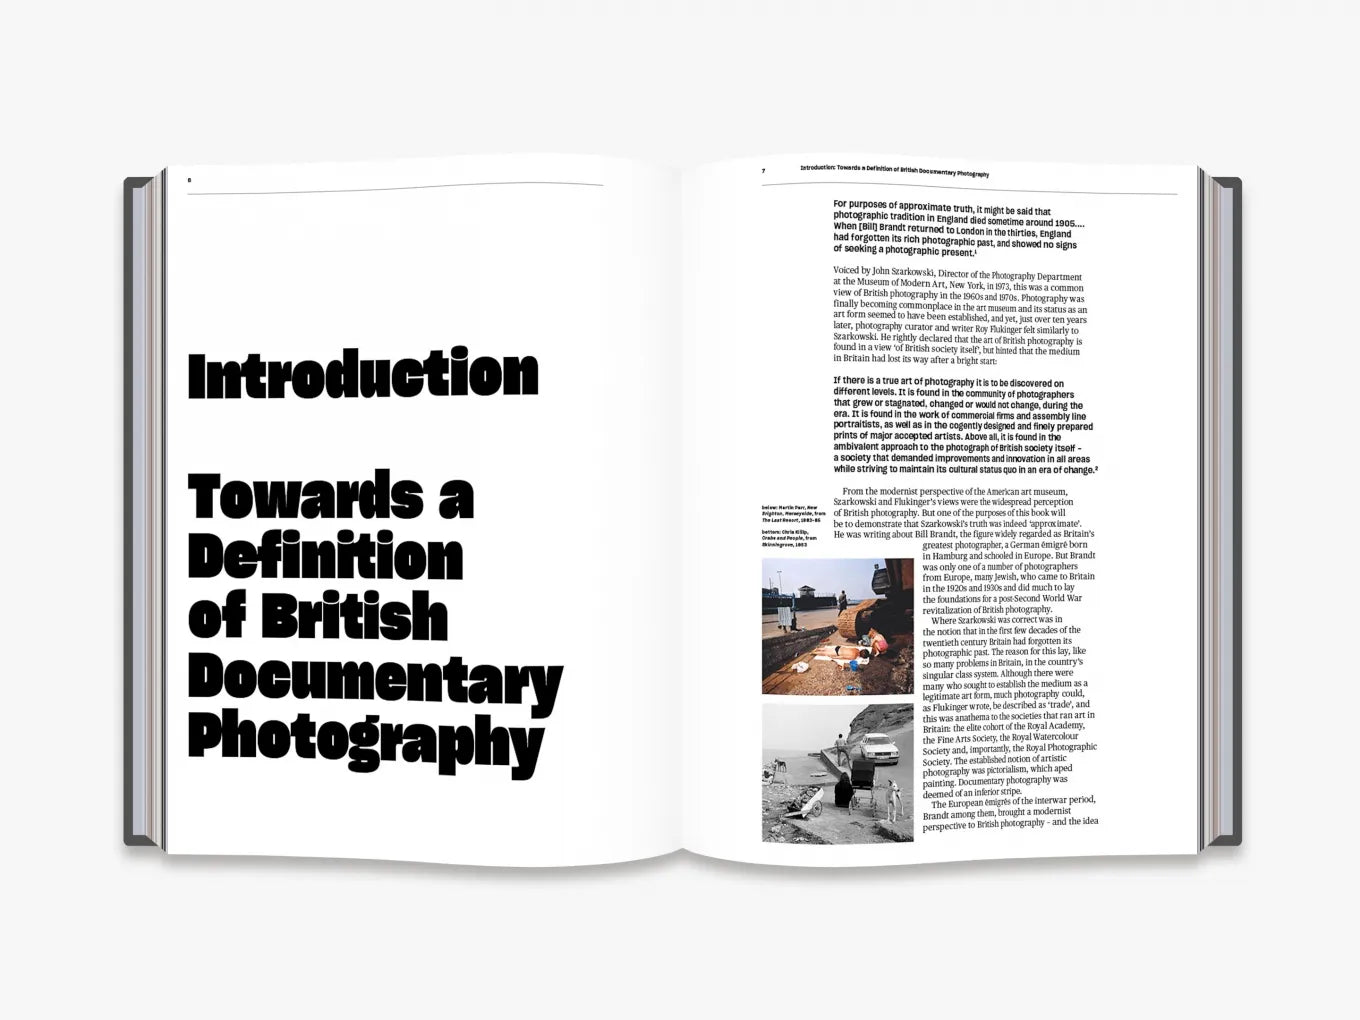 Another Country. British Documentary Photography since 1945